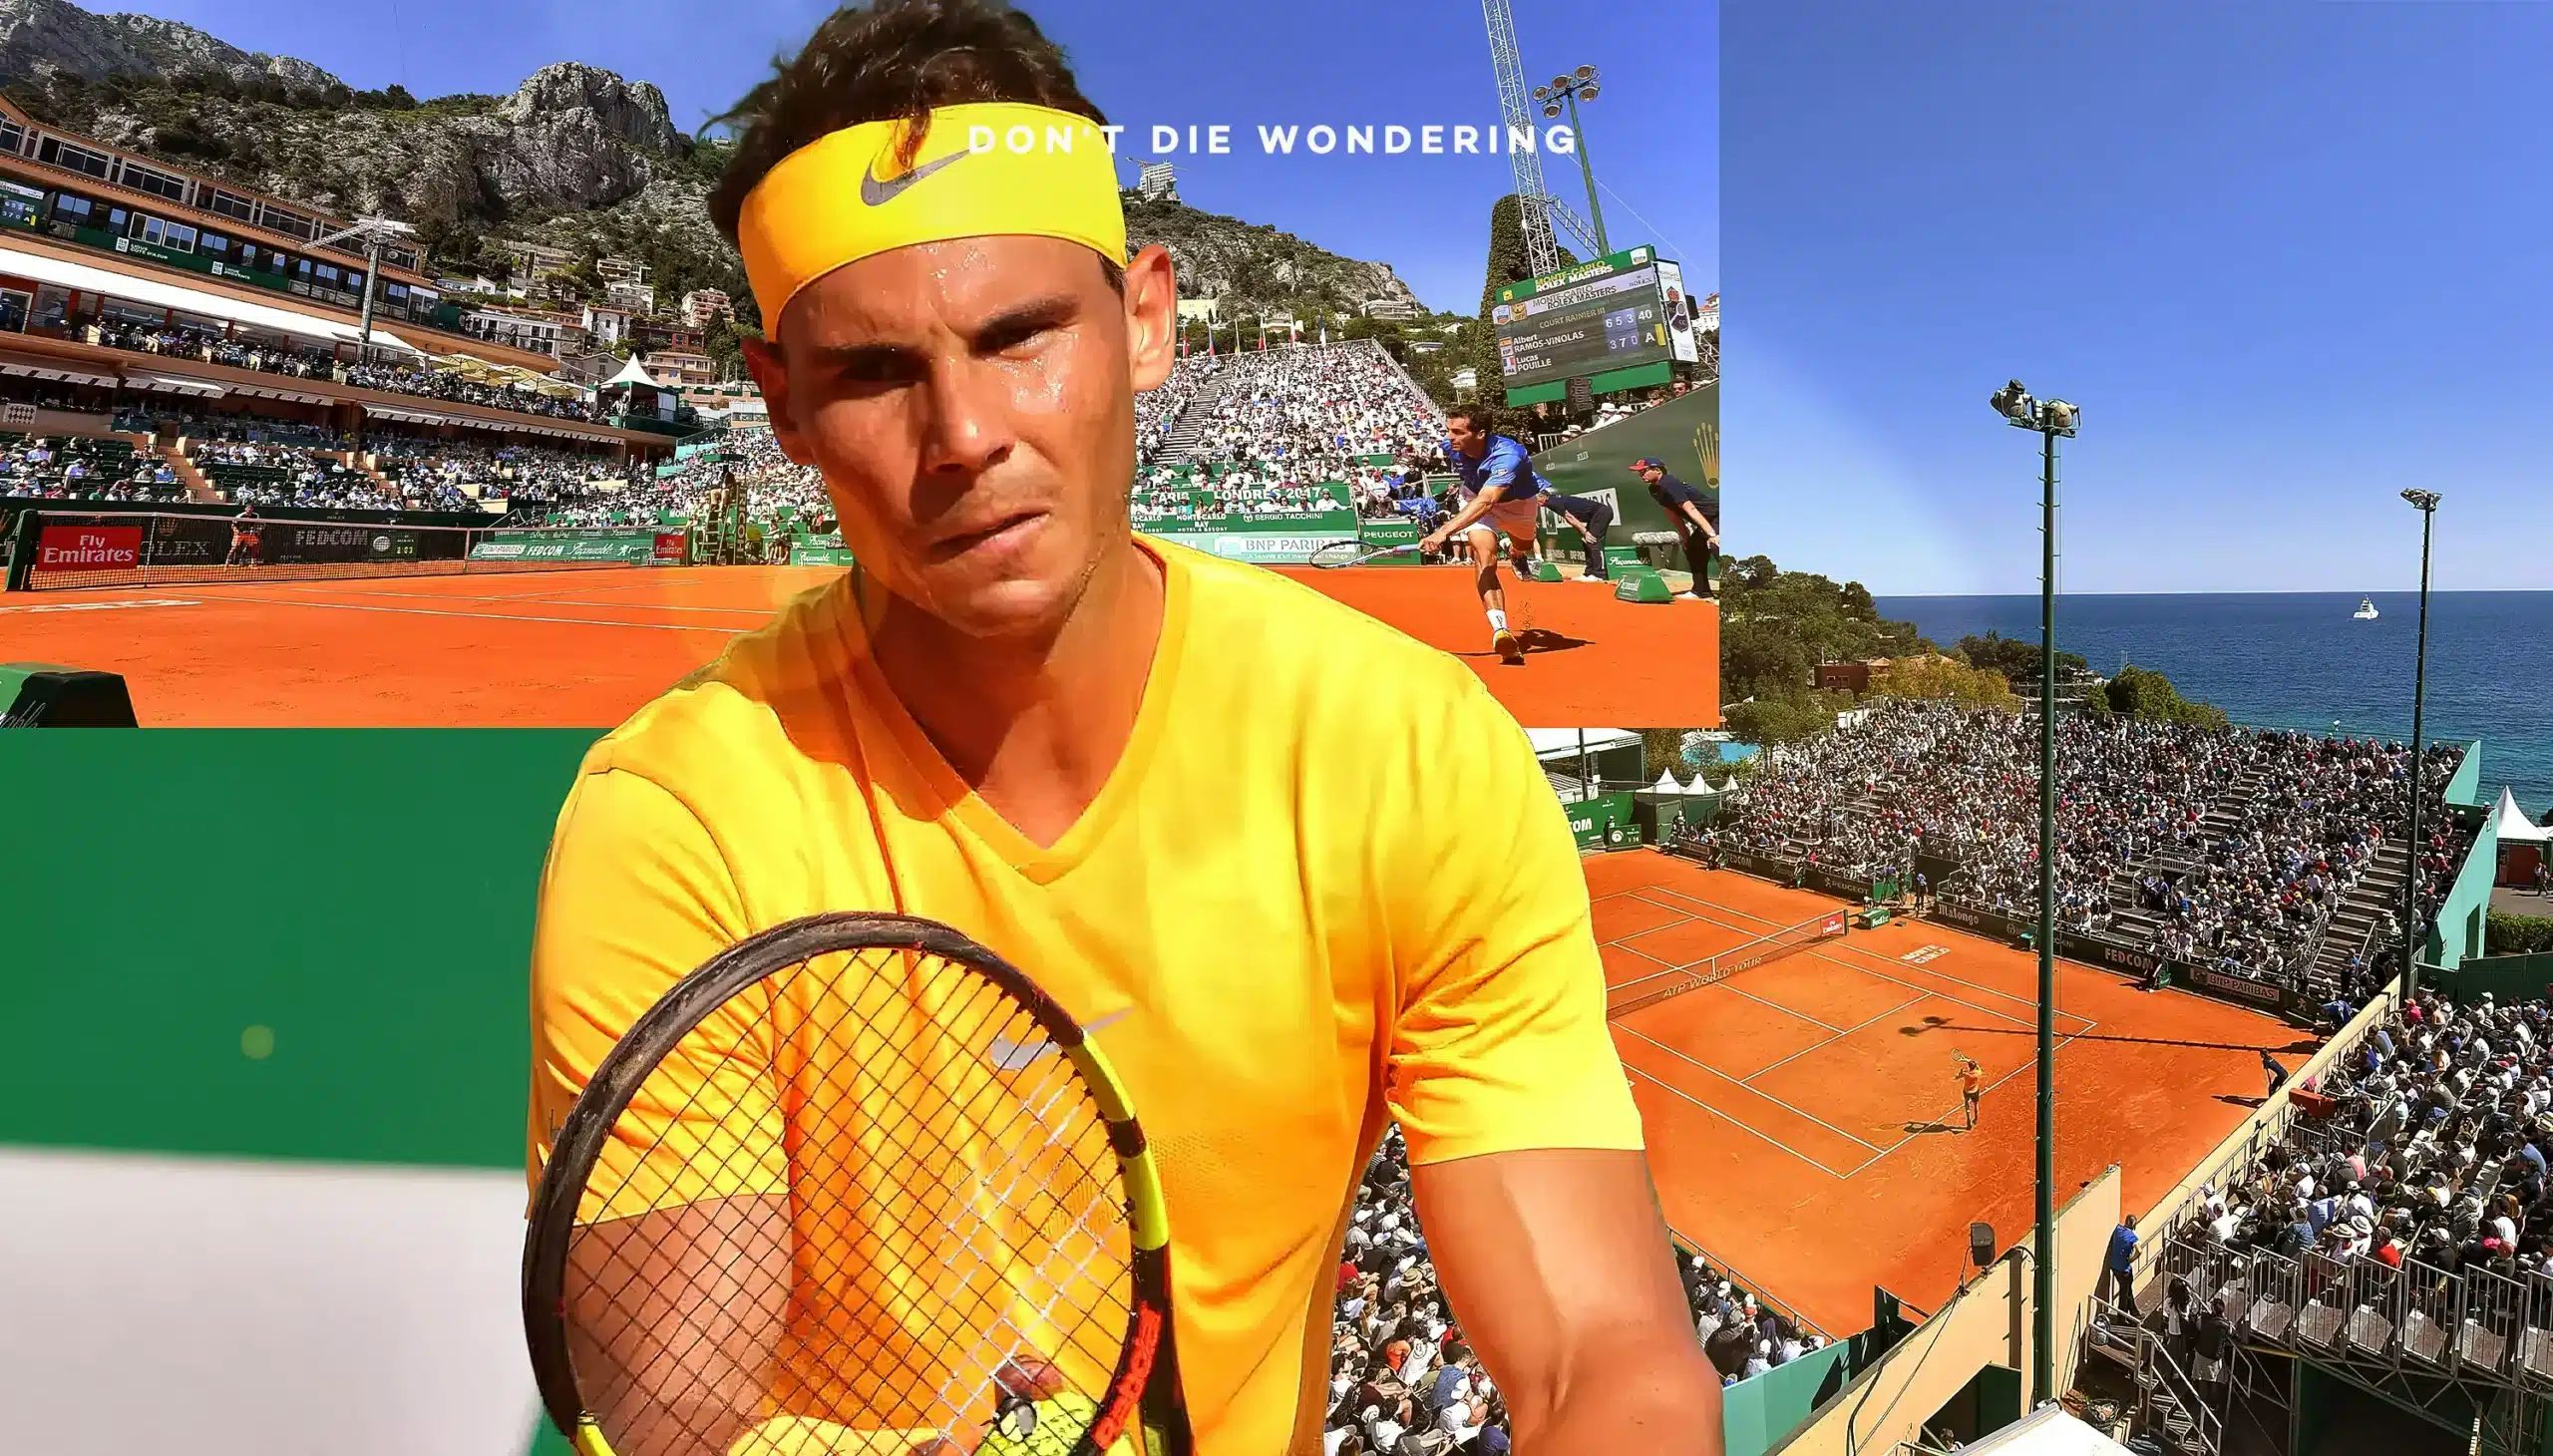 A Summary of What Happened at the Monte Carlo Masters